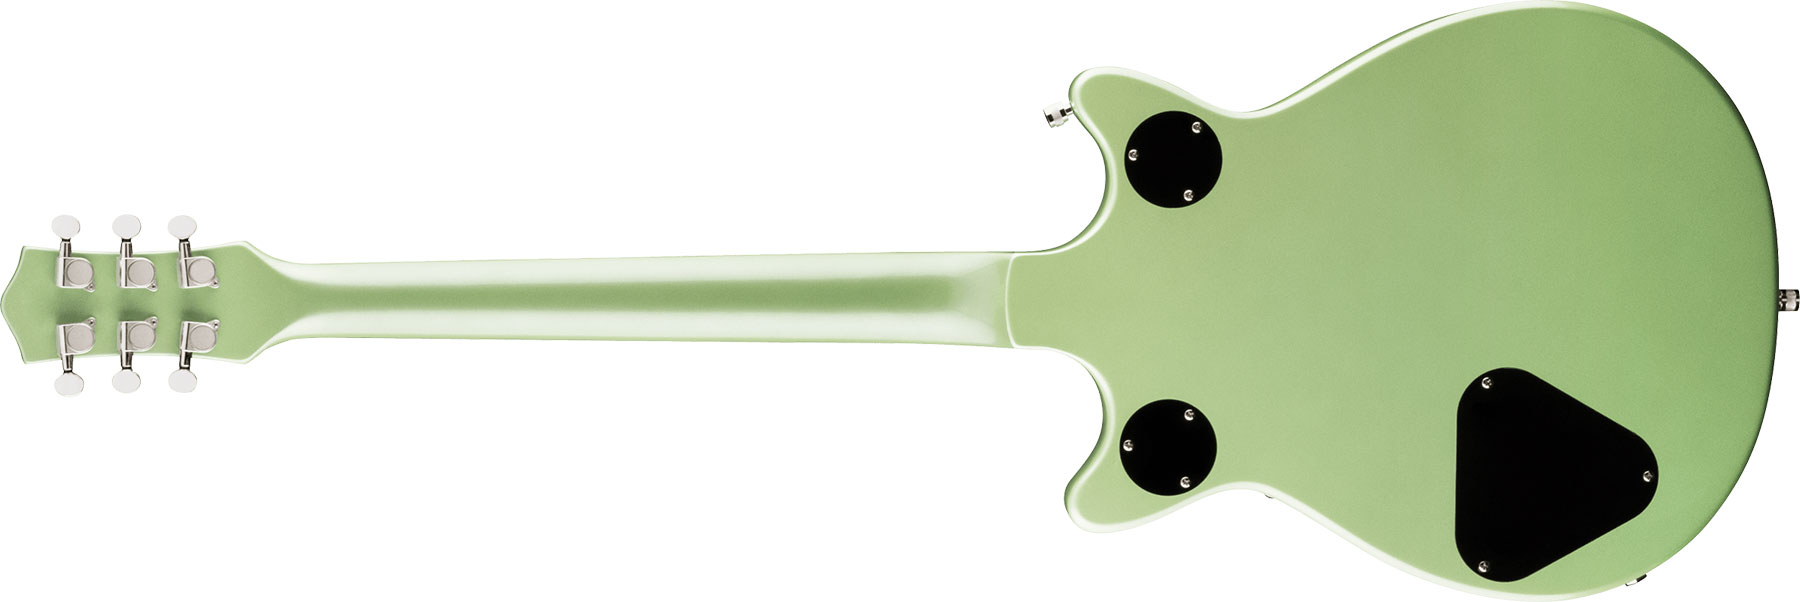 Gretsch G5232t Electromatic Double Jet Ft Hh Bigsby Lau - Broadway Jade - Double Cut E-Gitarre - Variation 1